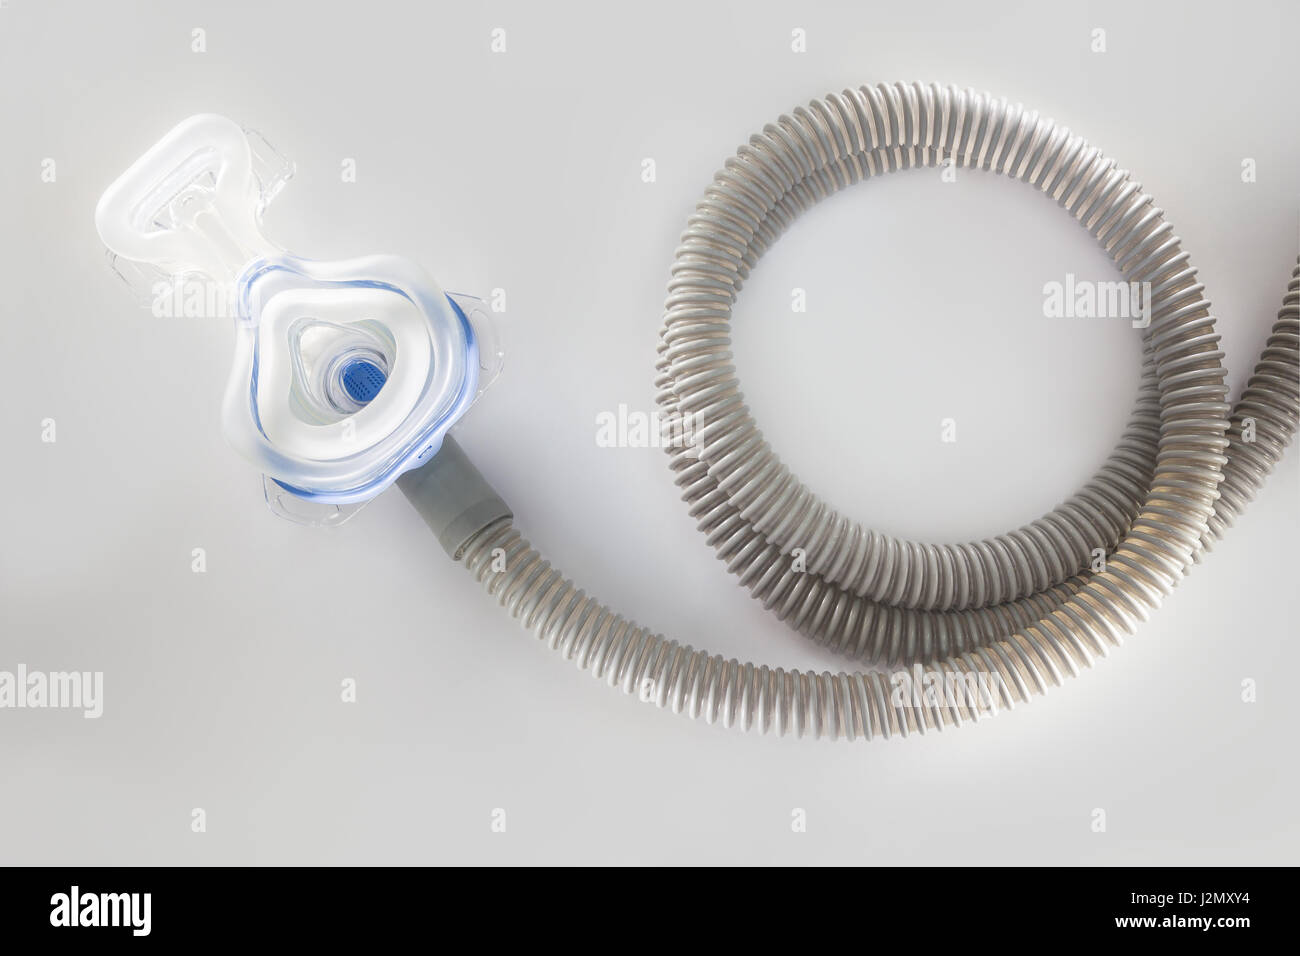 CPAP machine mask and hose, for people with sleep apnea, respiratory, or breathing disorder Stock Photo